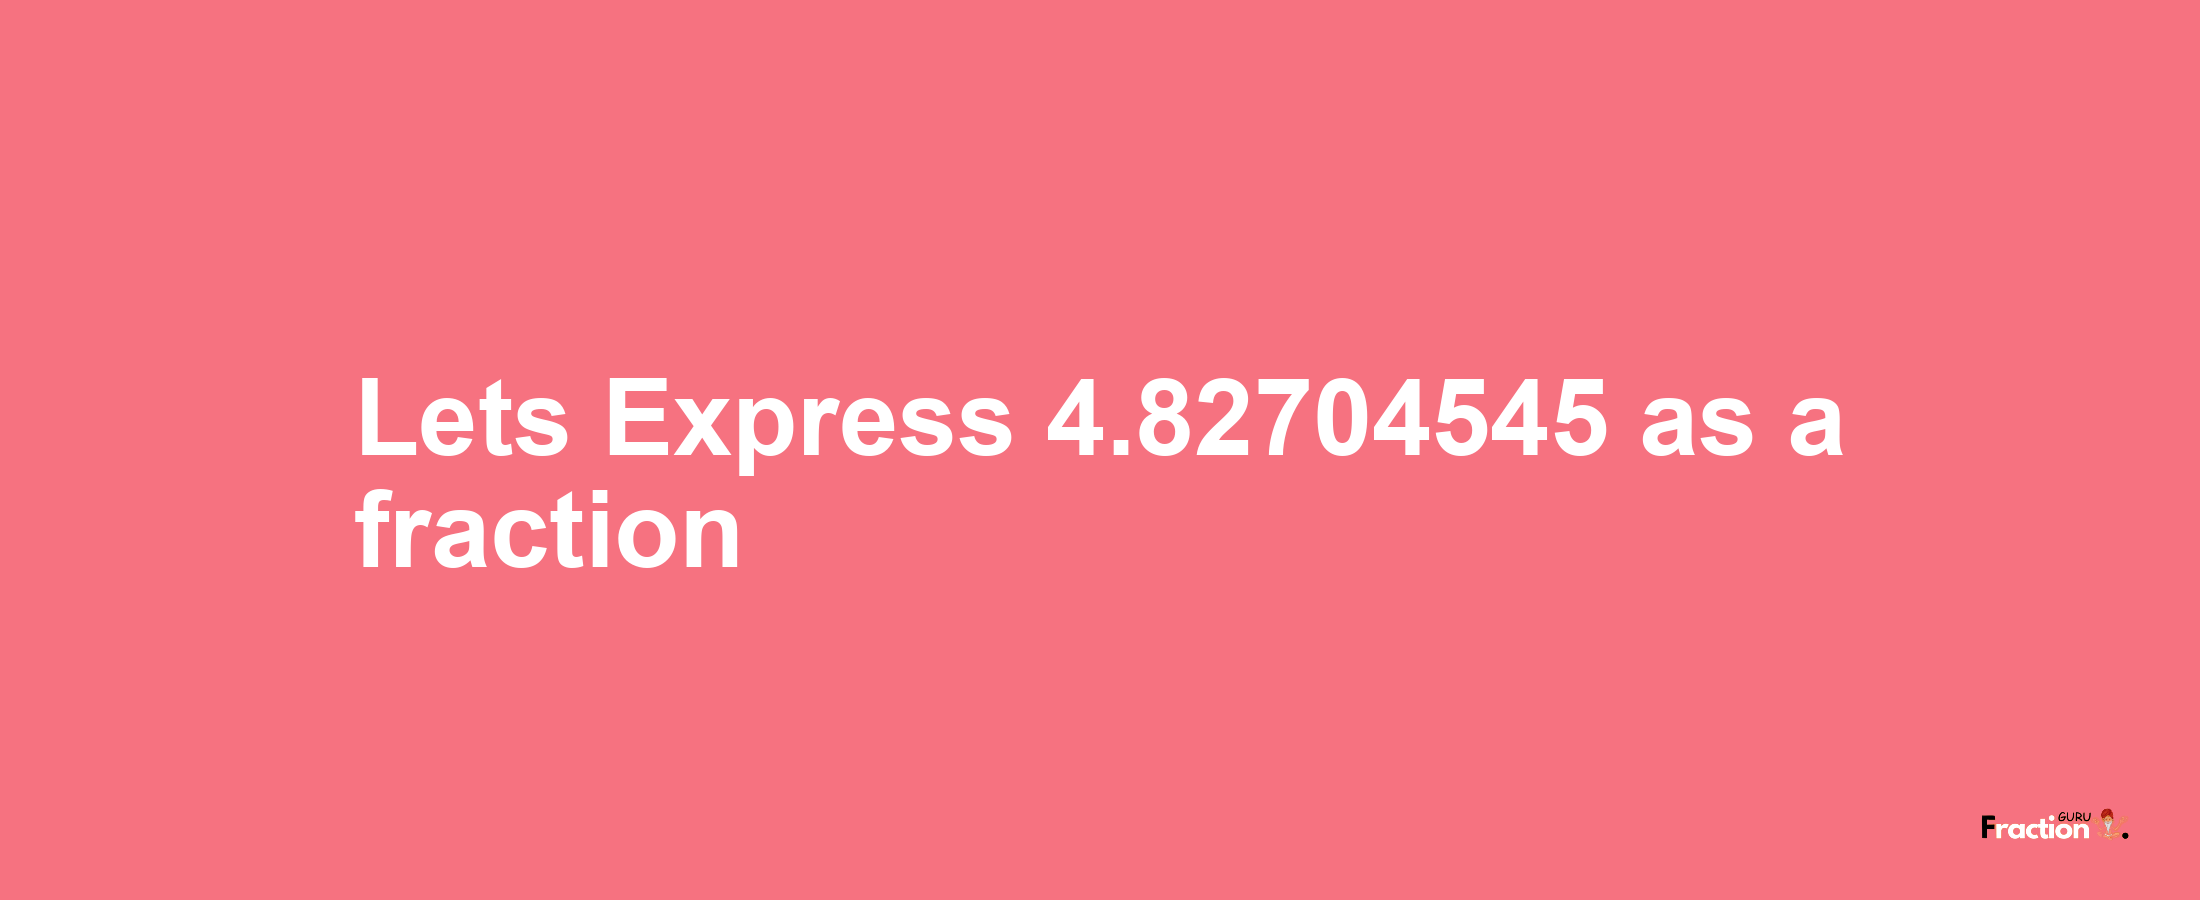 Lets Express 4.82704545 as afraction